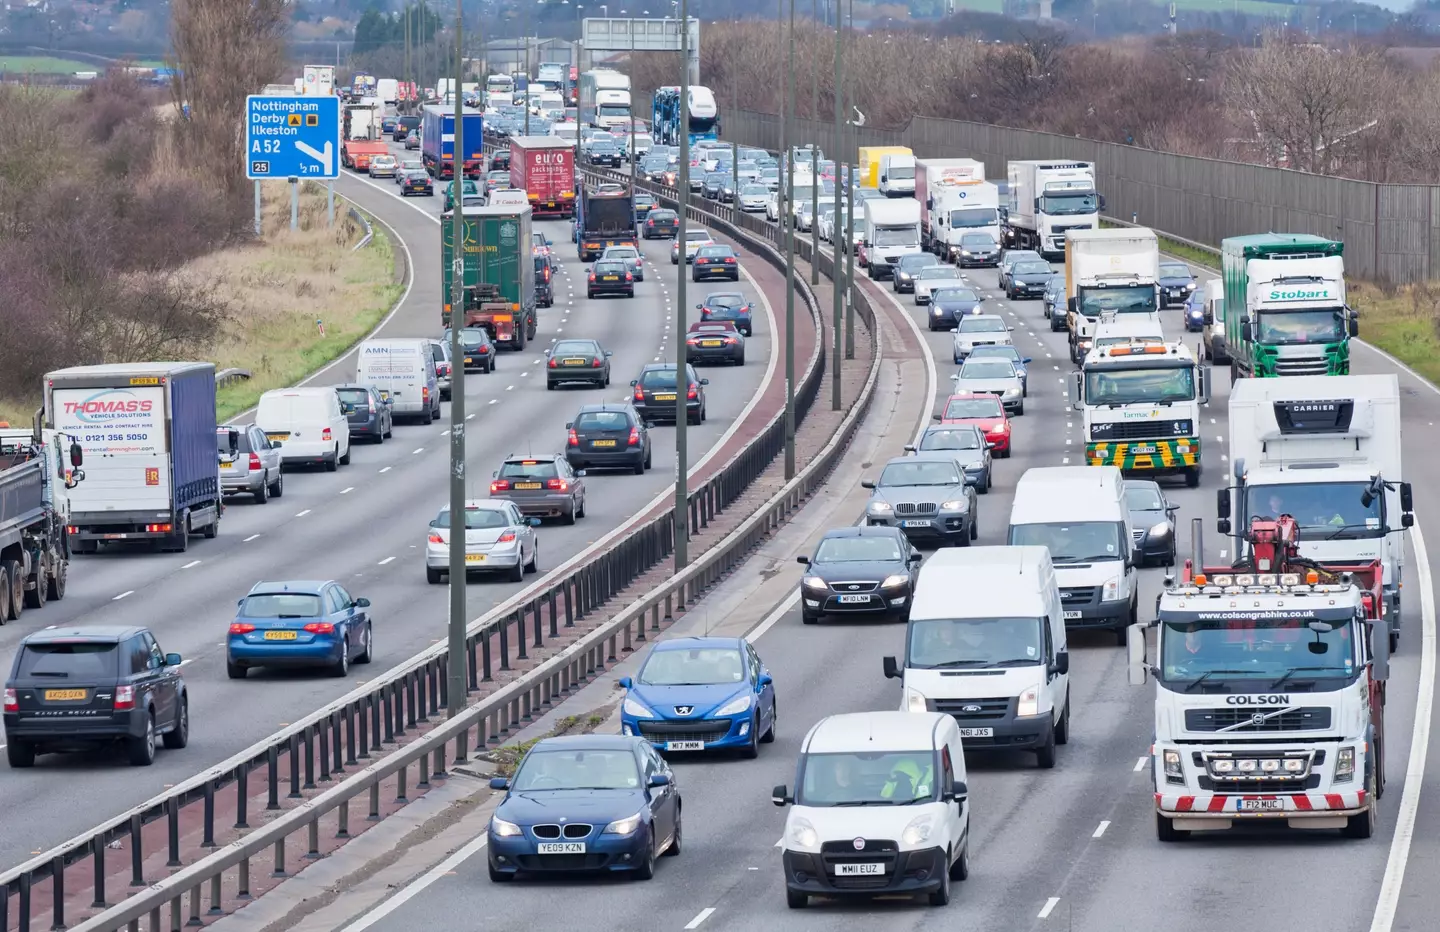 European governments have also been urged to reduce their motorway speed limits.